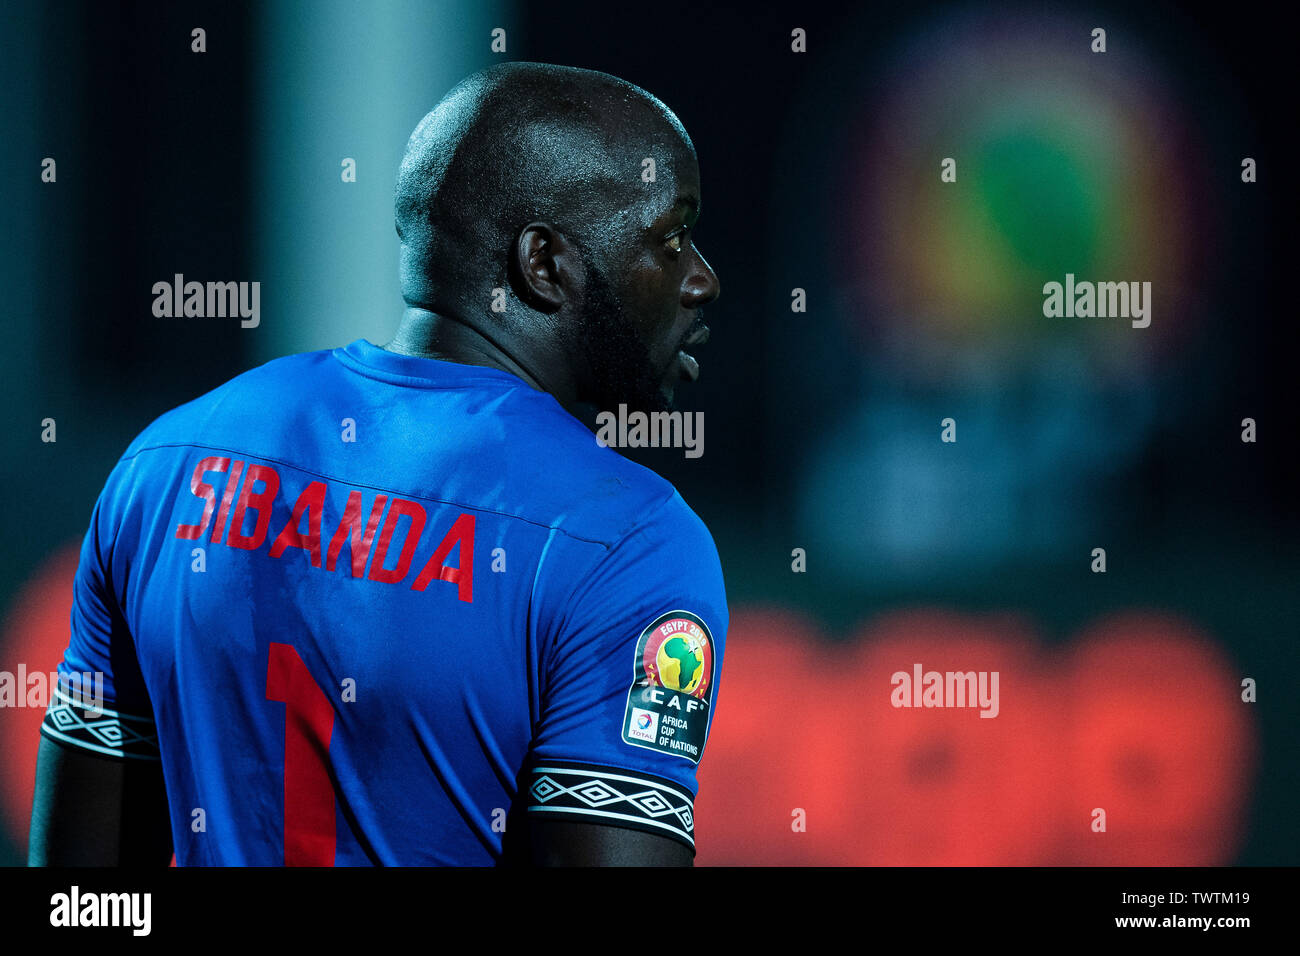 CAIRO, EGYPT - JUNE 21: Edmore Sibanda of Zimbabwe: looks on during the 2019 Africa Cup of Nations Group A match between Egypt and Zimbabwe at Cairo International Stadium on June 21, 2019 in Cairo, Egypt. (Photo by Sebastian Frej/MB Media) Stock Photo